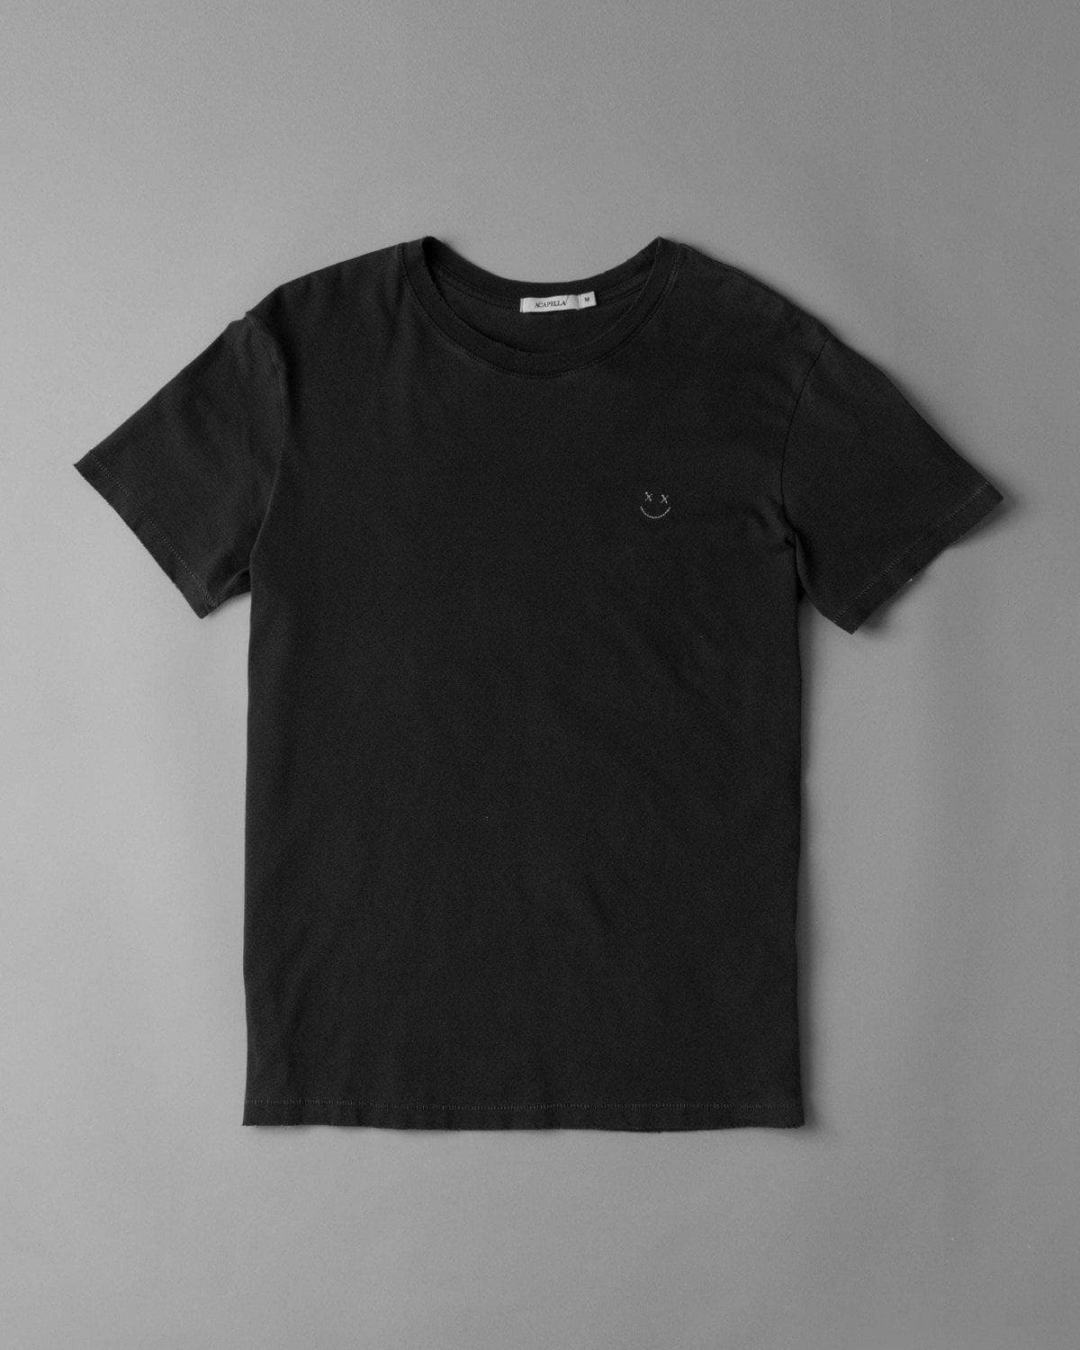 Smiley Tee - Washed Black